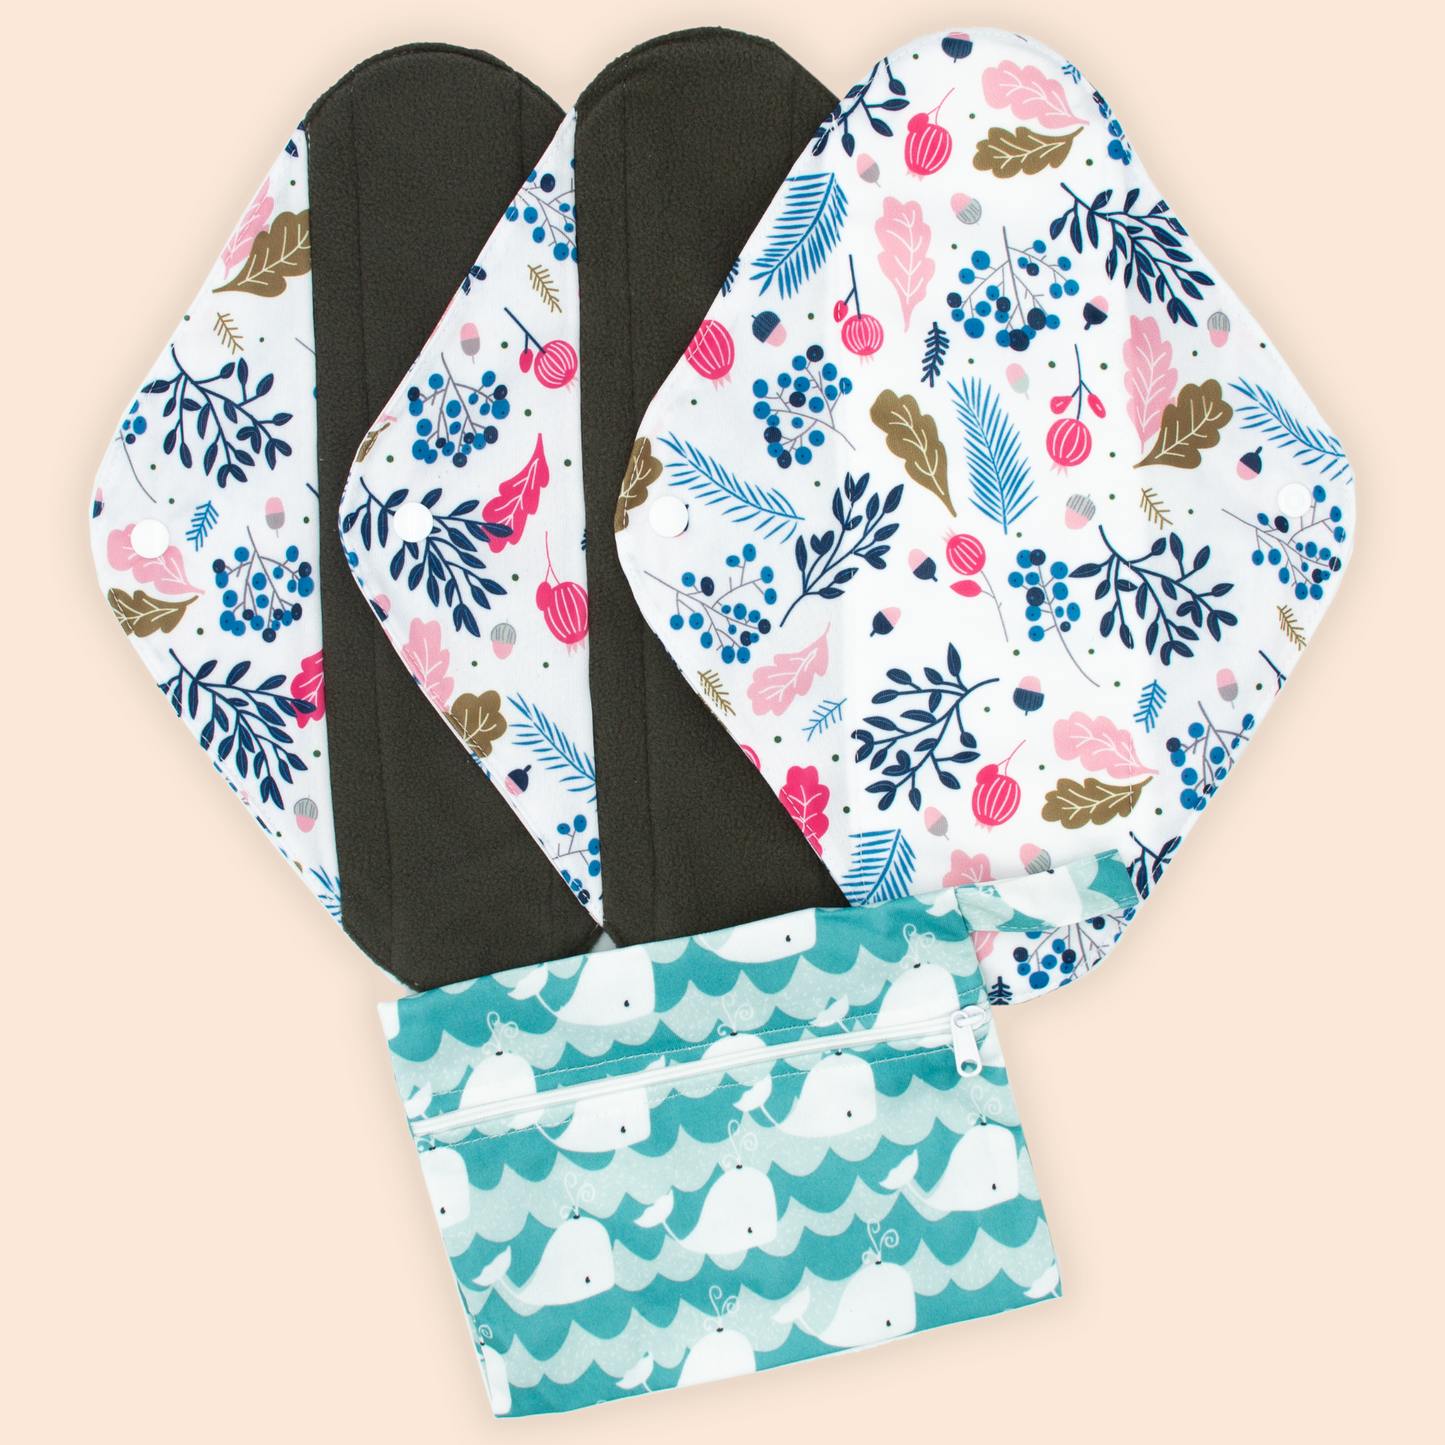 Pack of 3 Reusable Night Pads + Free Wet Bag | Fall Leafs